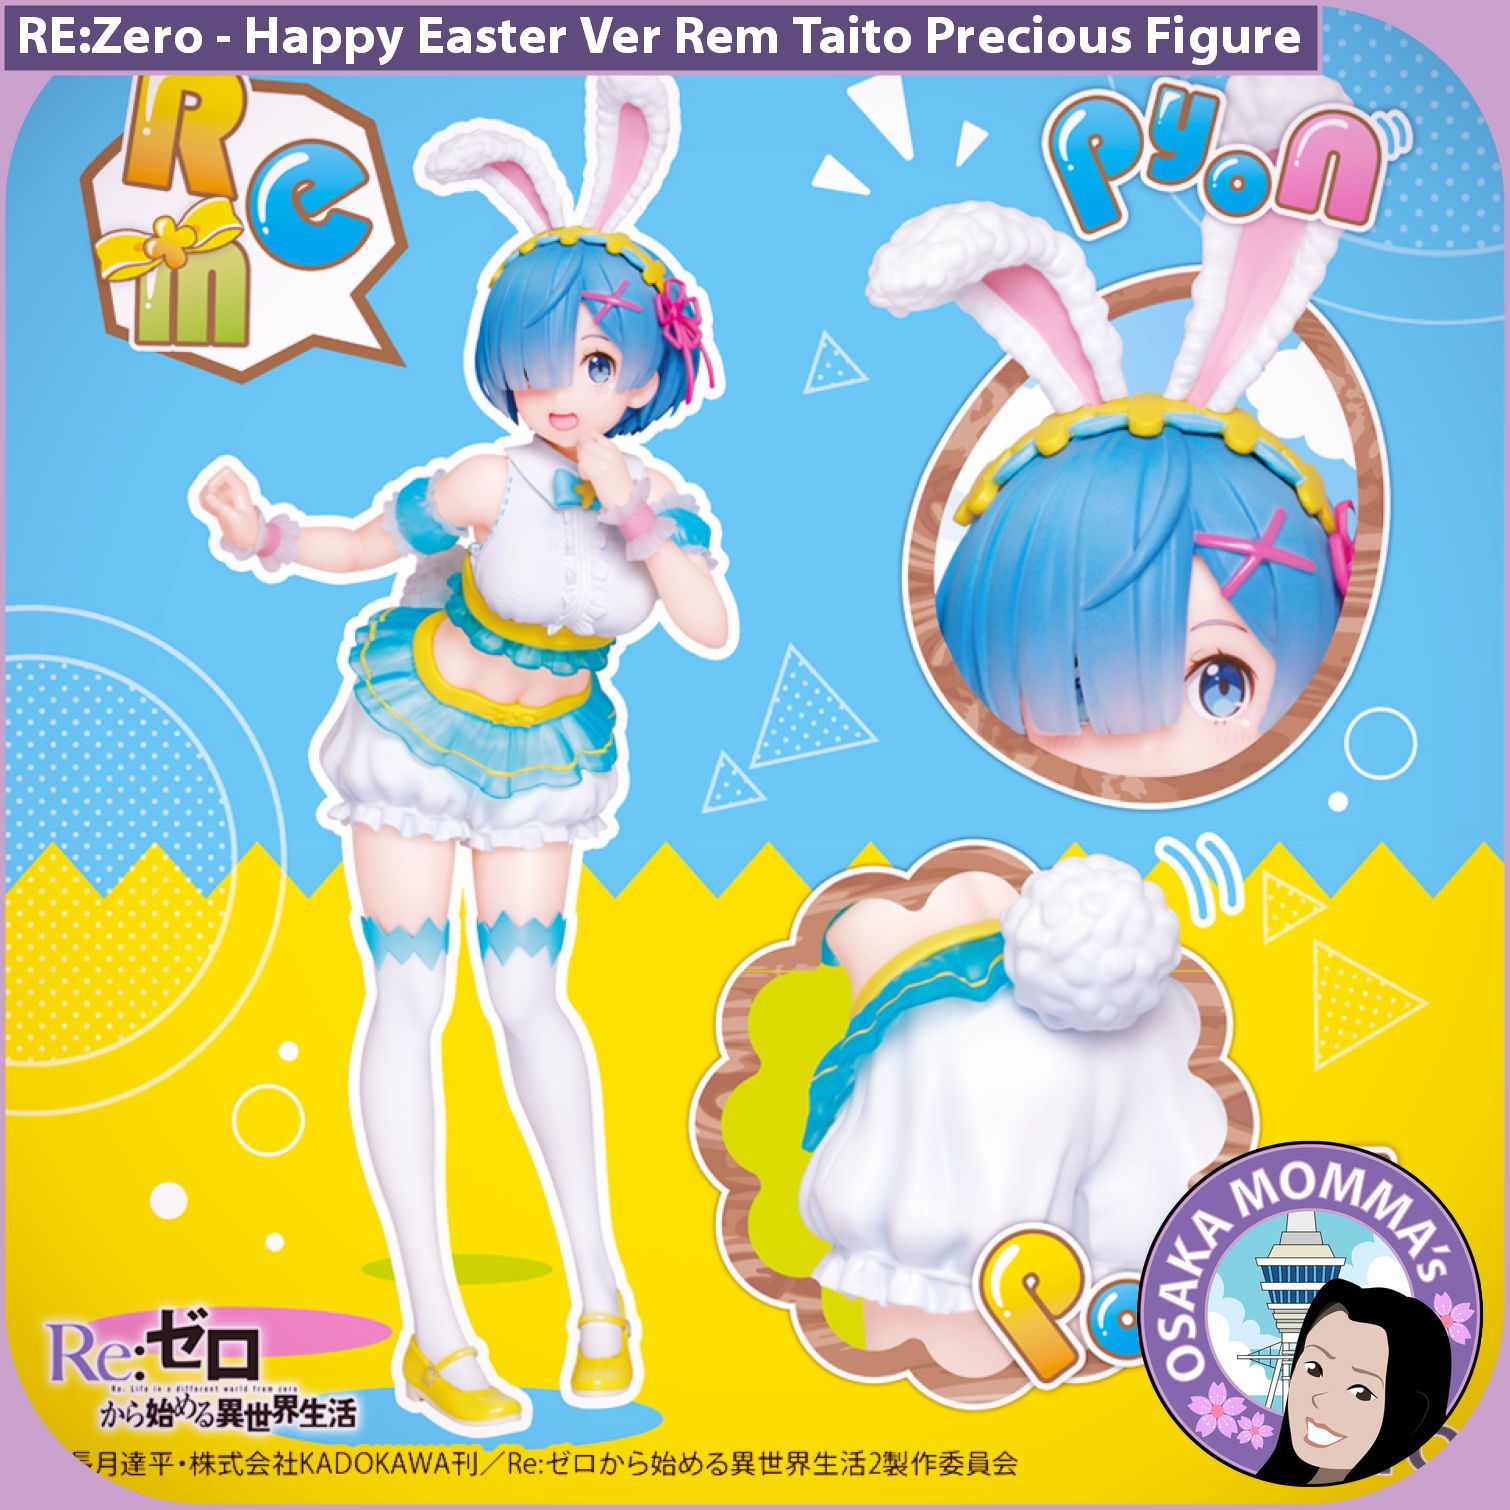 Happy Easter Ver Rem Taito Figure